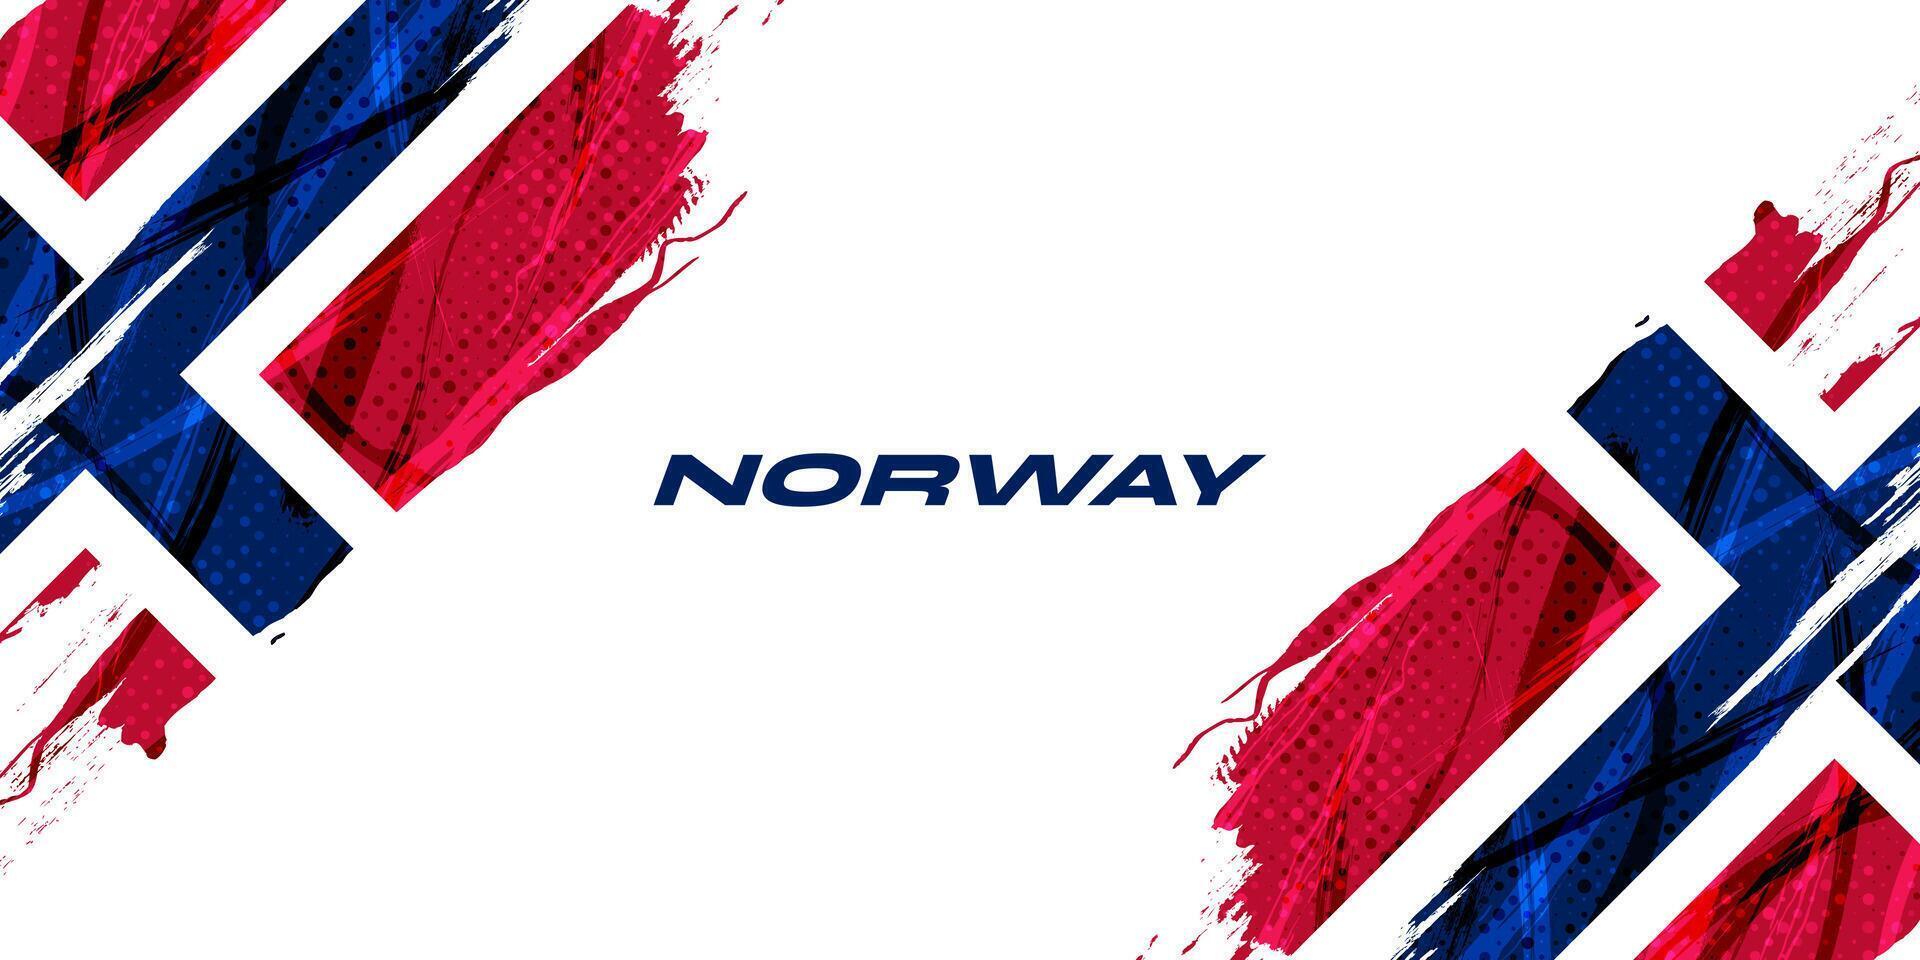 Norway Flag in Brush Paint Style with Halftone Effect. Norway National Flag Background with Grunge Concept vector